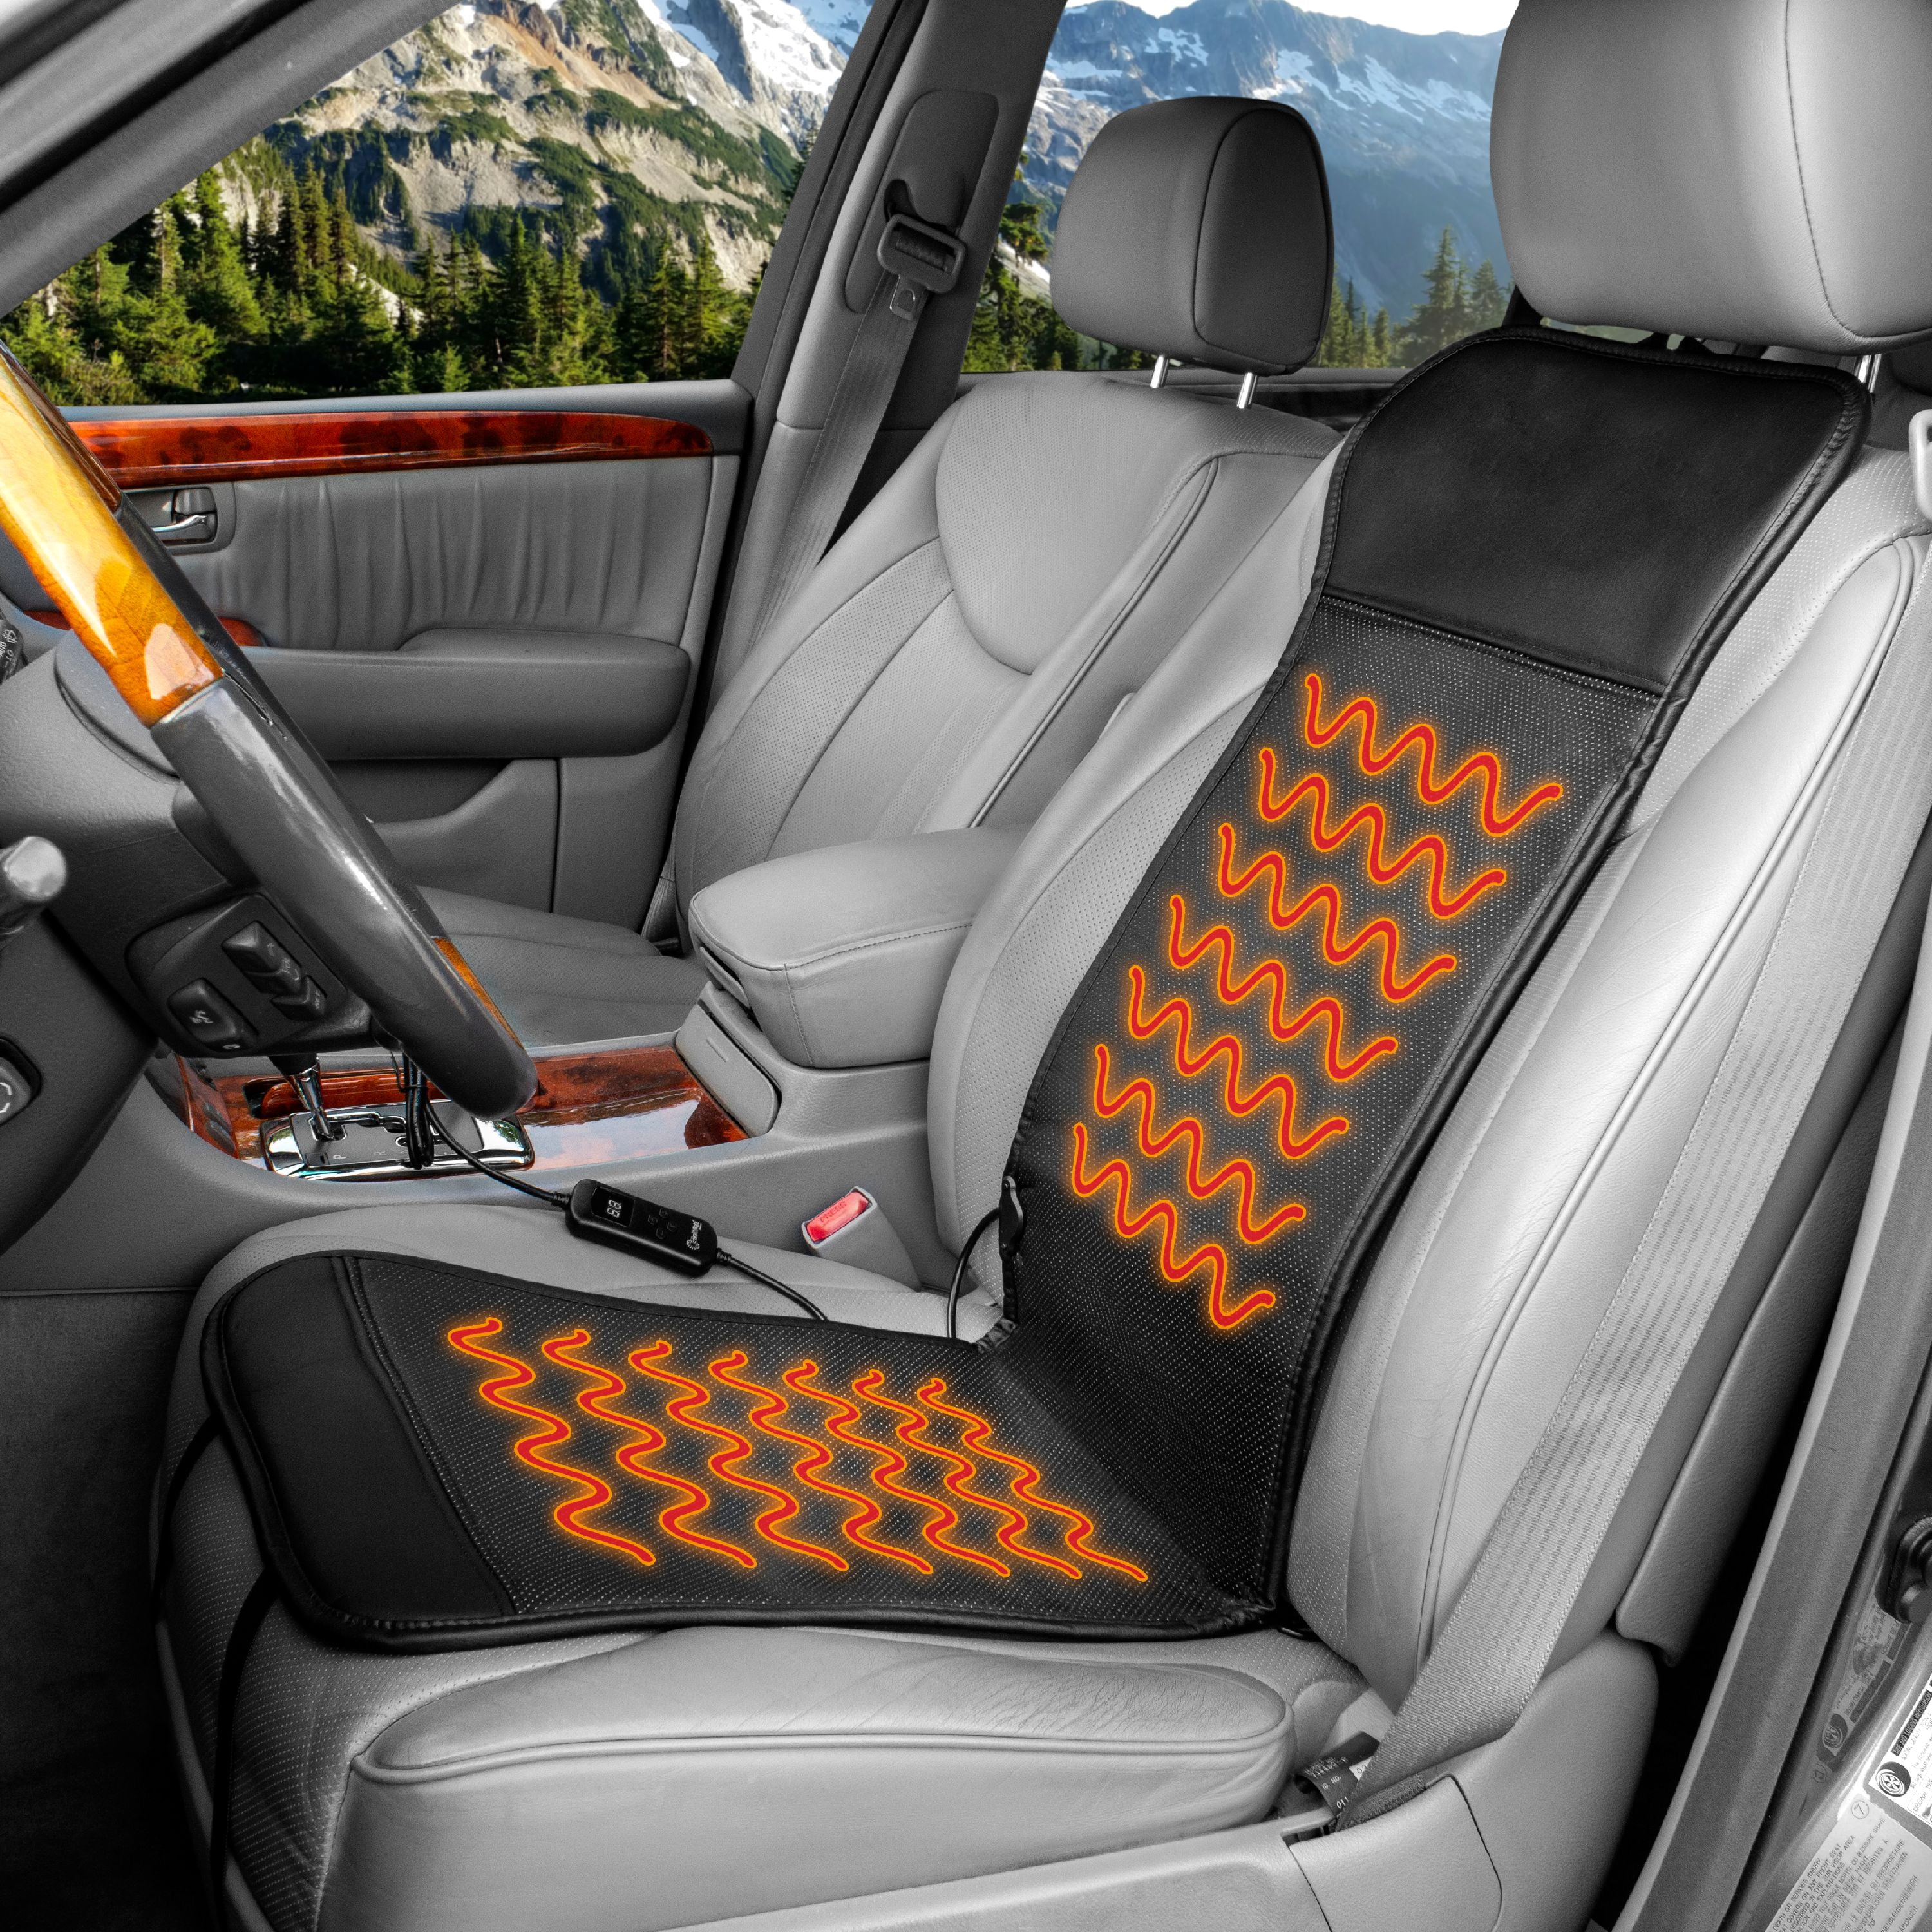 HealthMate Black Polyester Car Seat Cushion - 12-Volt Heated Cushion for Car  - Even Heating, Flexible Element for Comfort and Durability in the Interior  Car Accessories department at